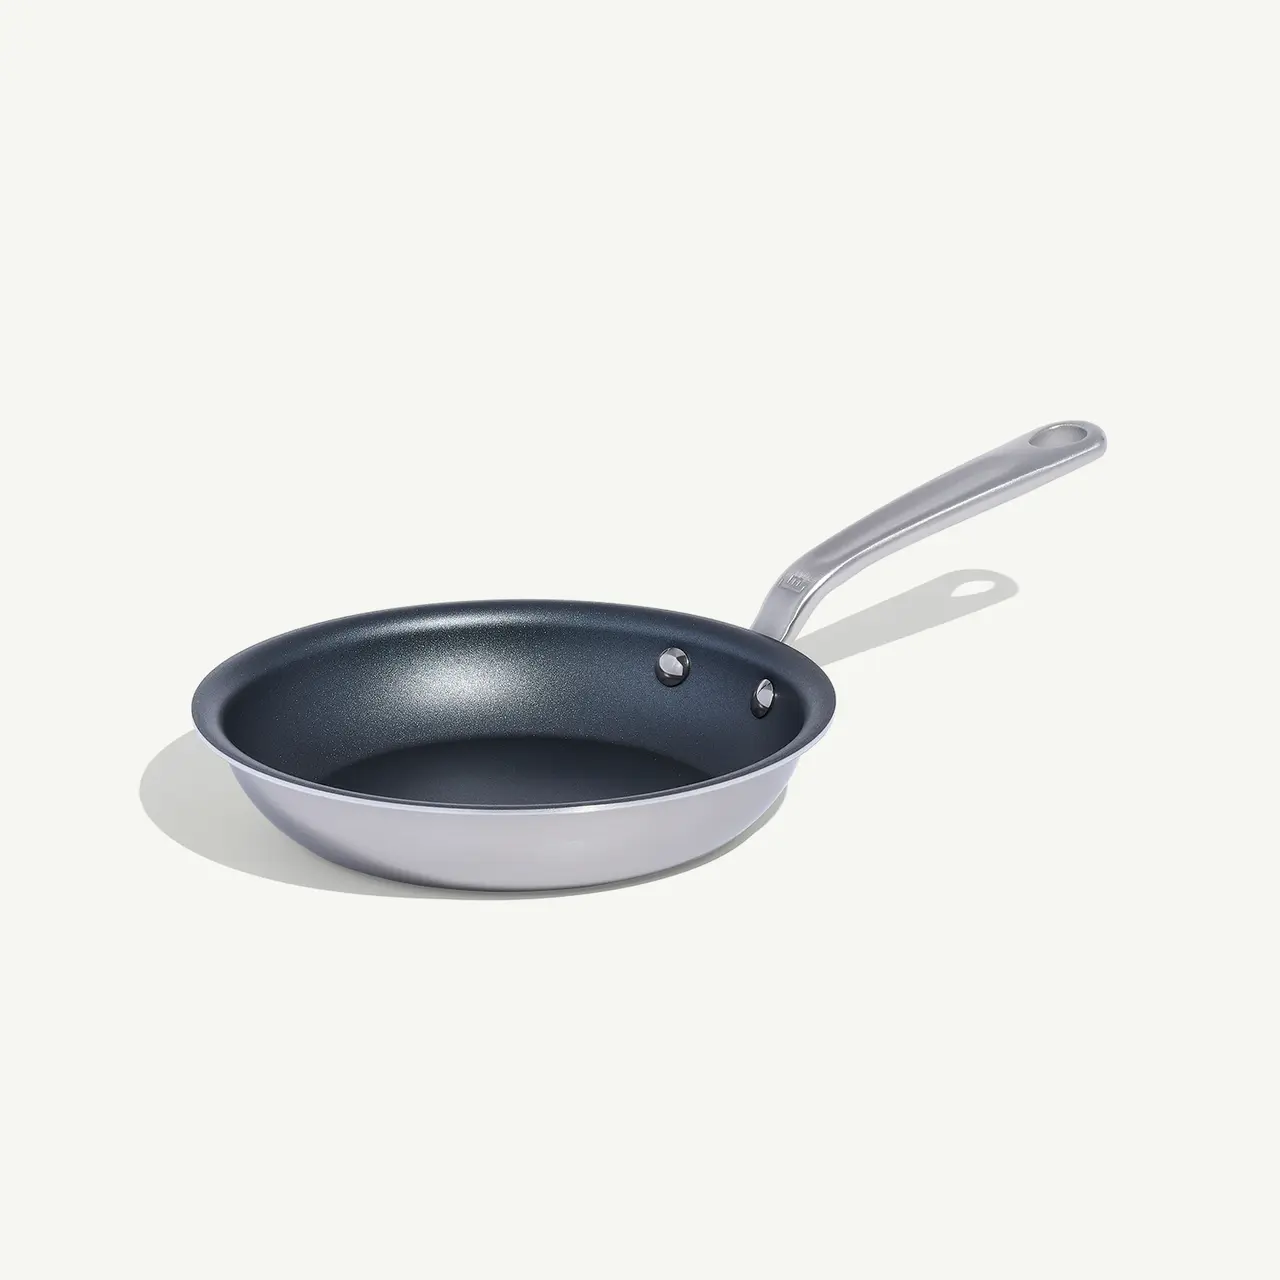 A non-stick frying pan with a silver handle is presented against a white background.